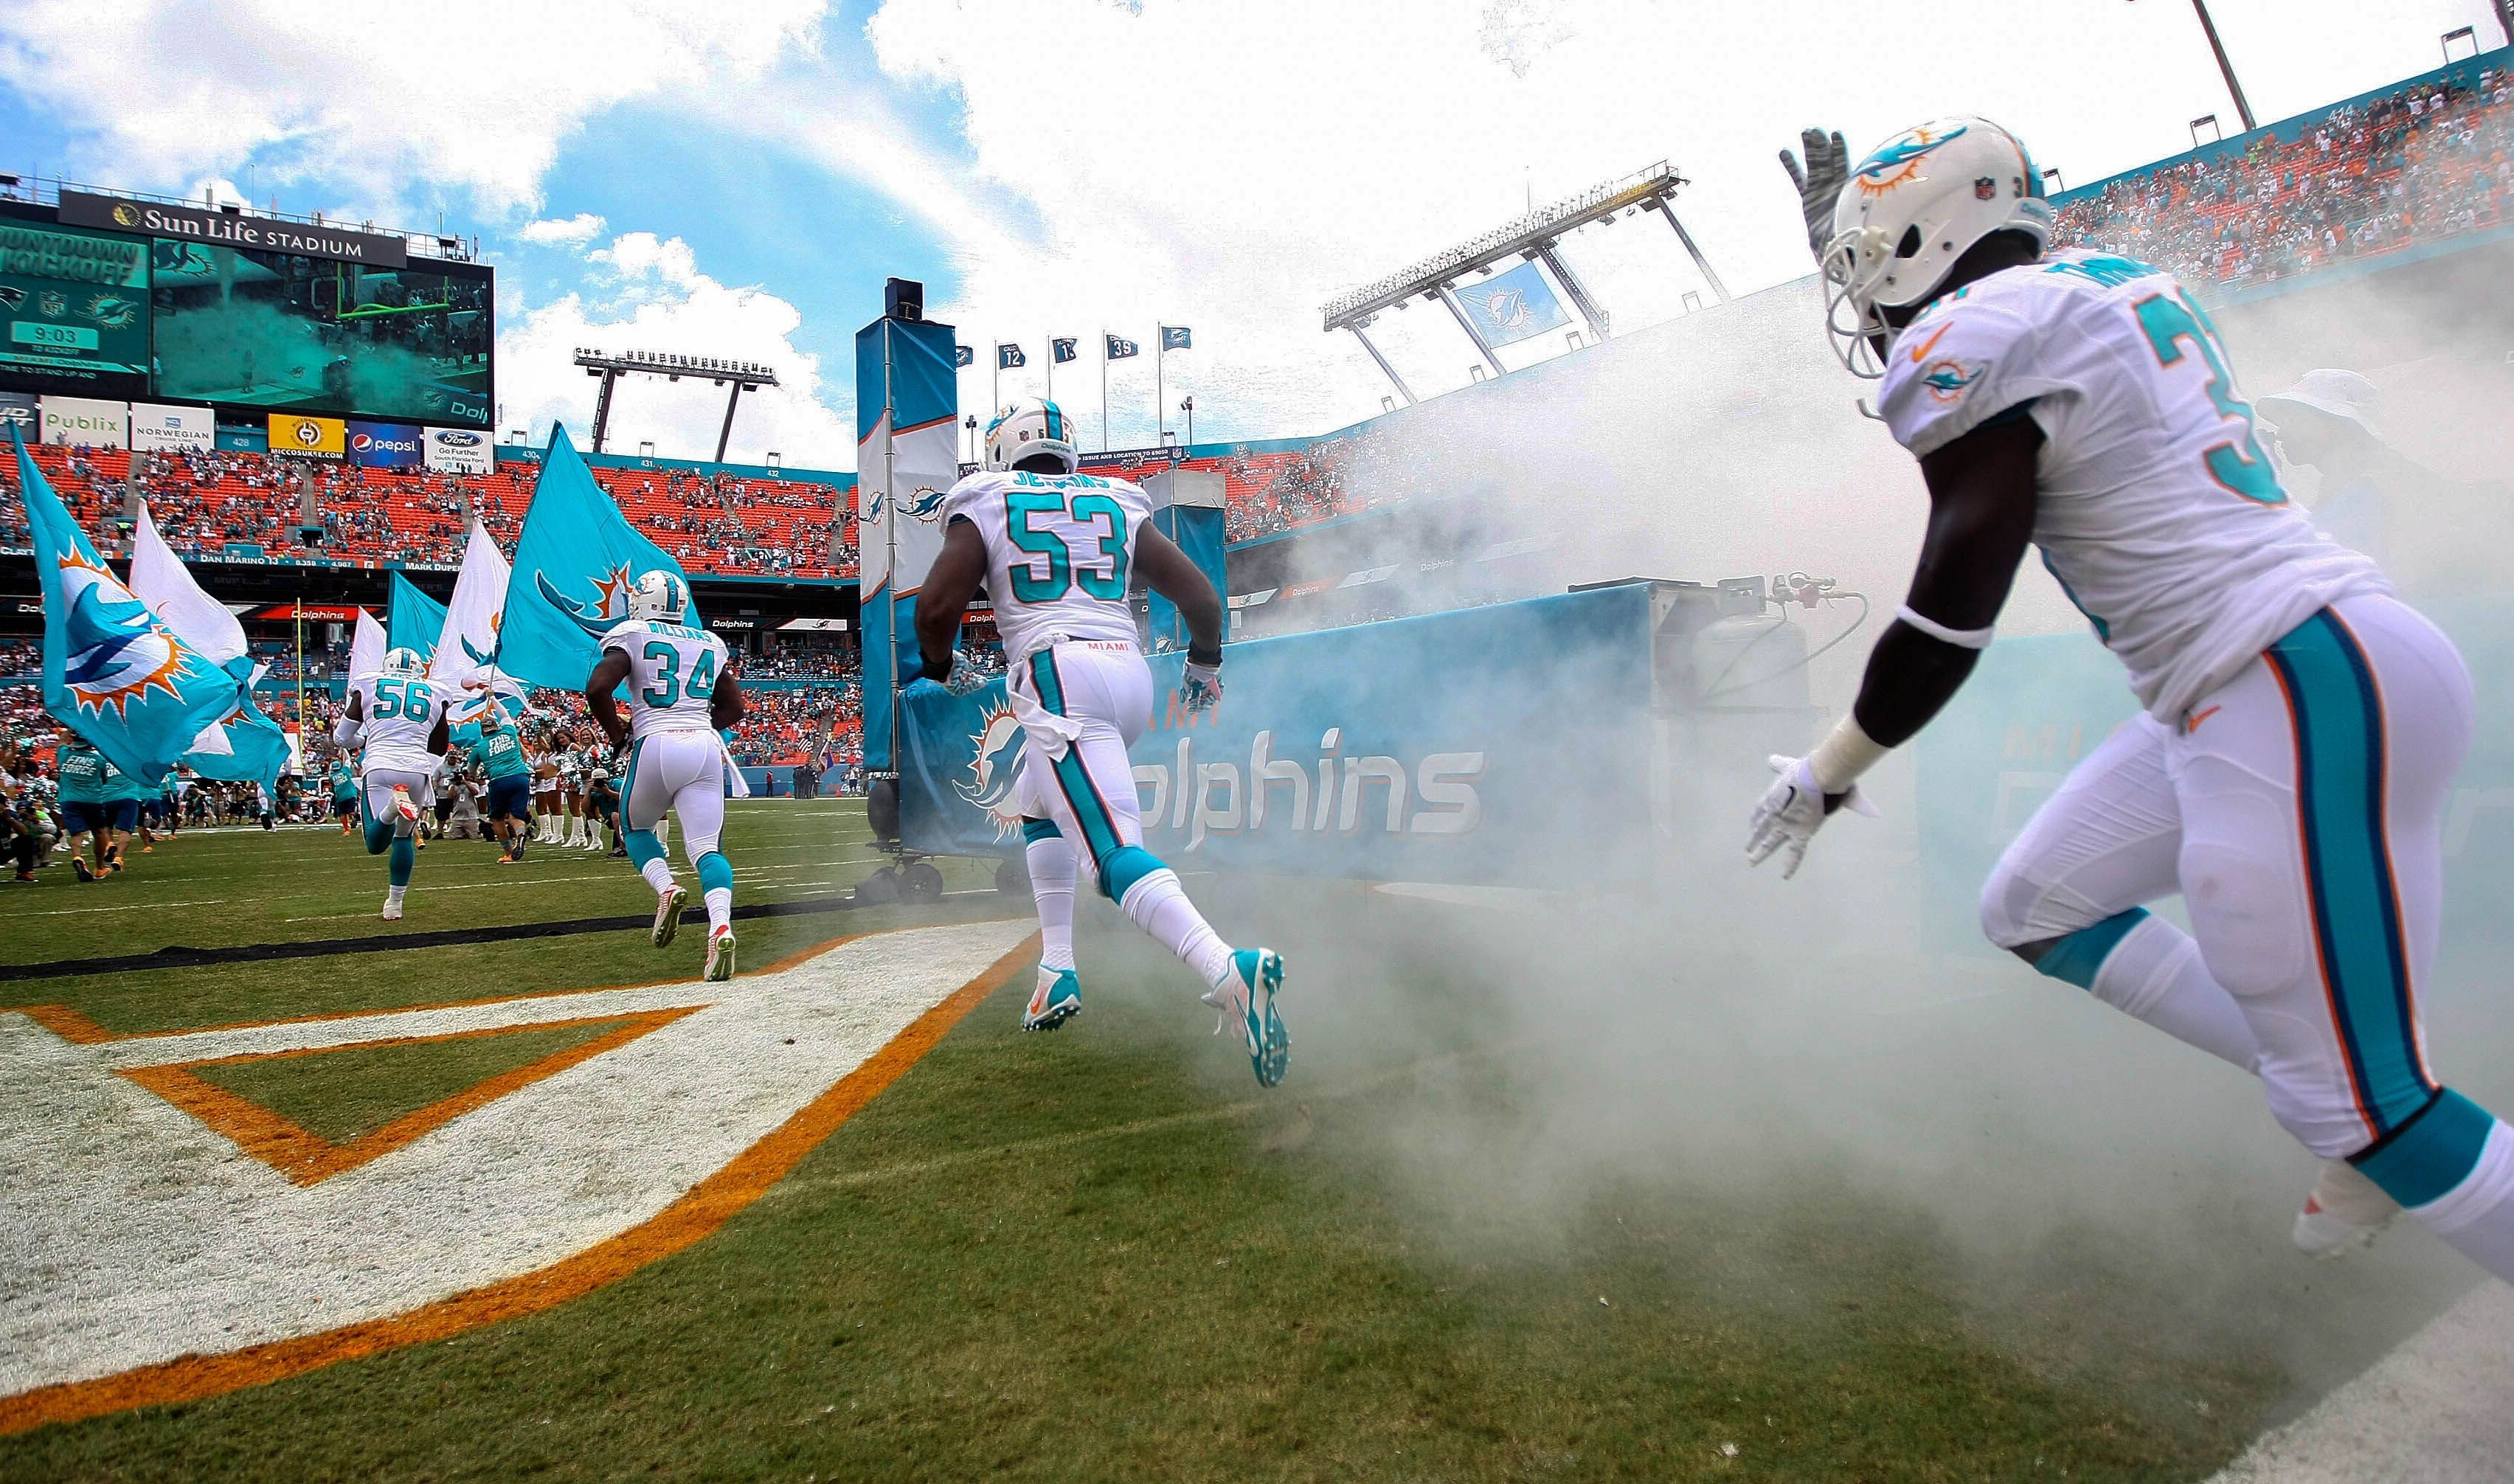 3408x2012 Miami-Dolphins-Wallpapers-Images-Download | wallpaper.wiki